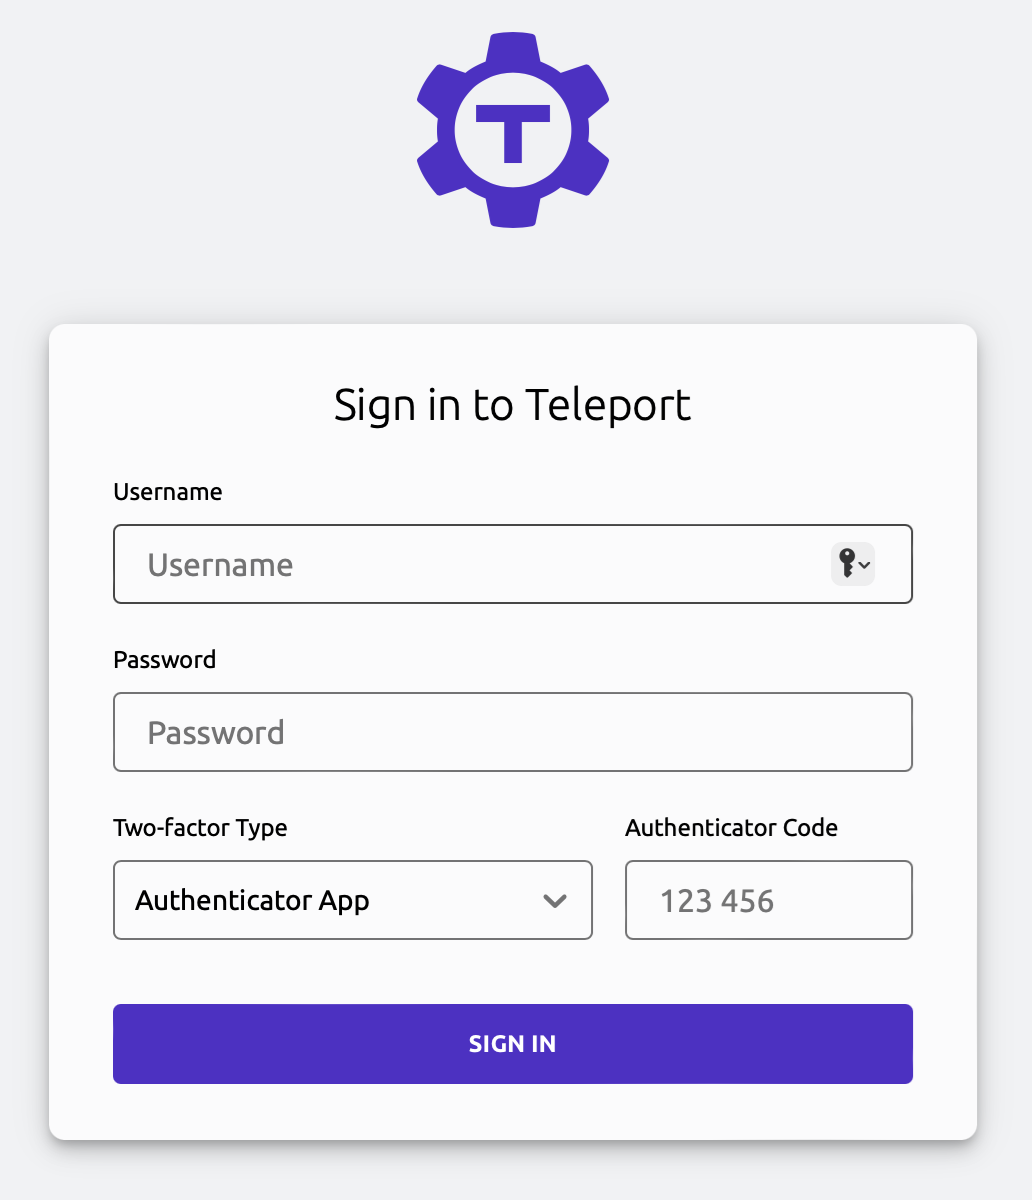 gravitational teleport - Accessing the Teleport sign-in page